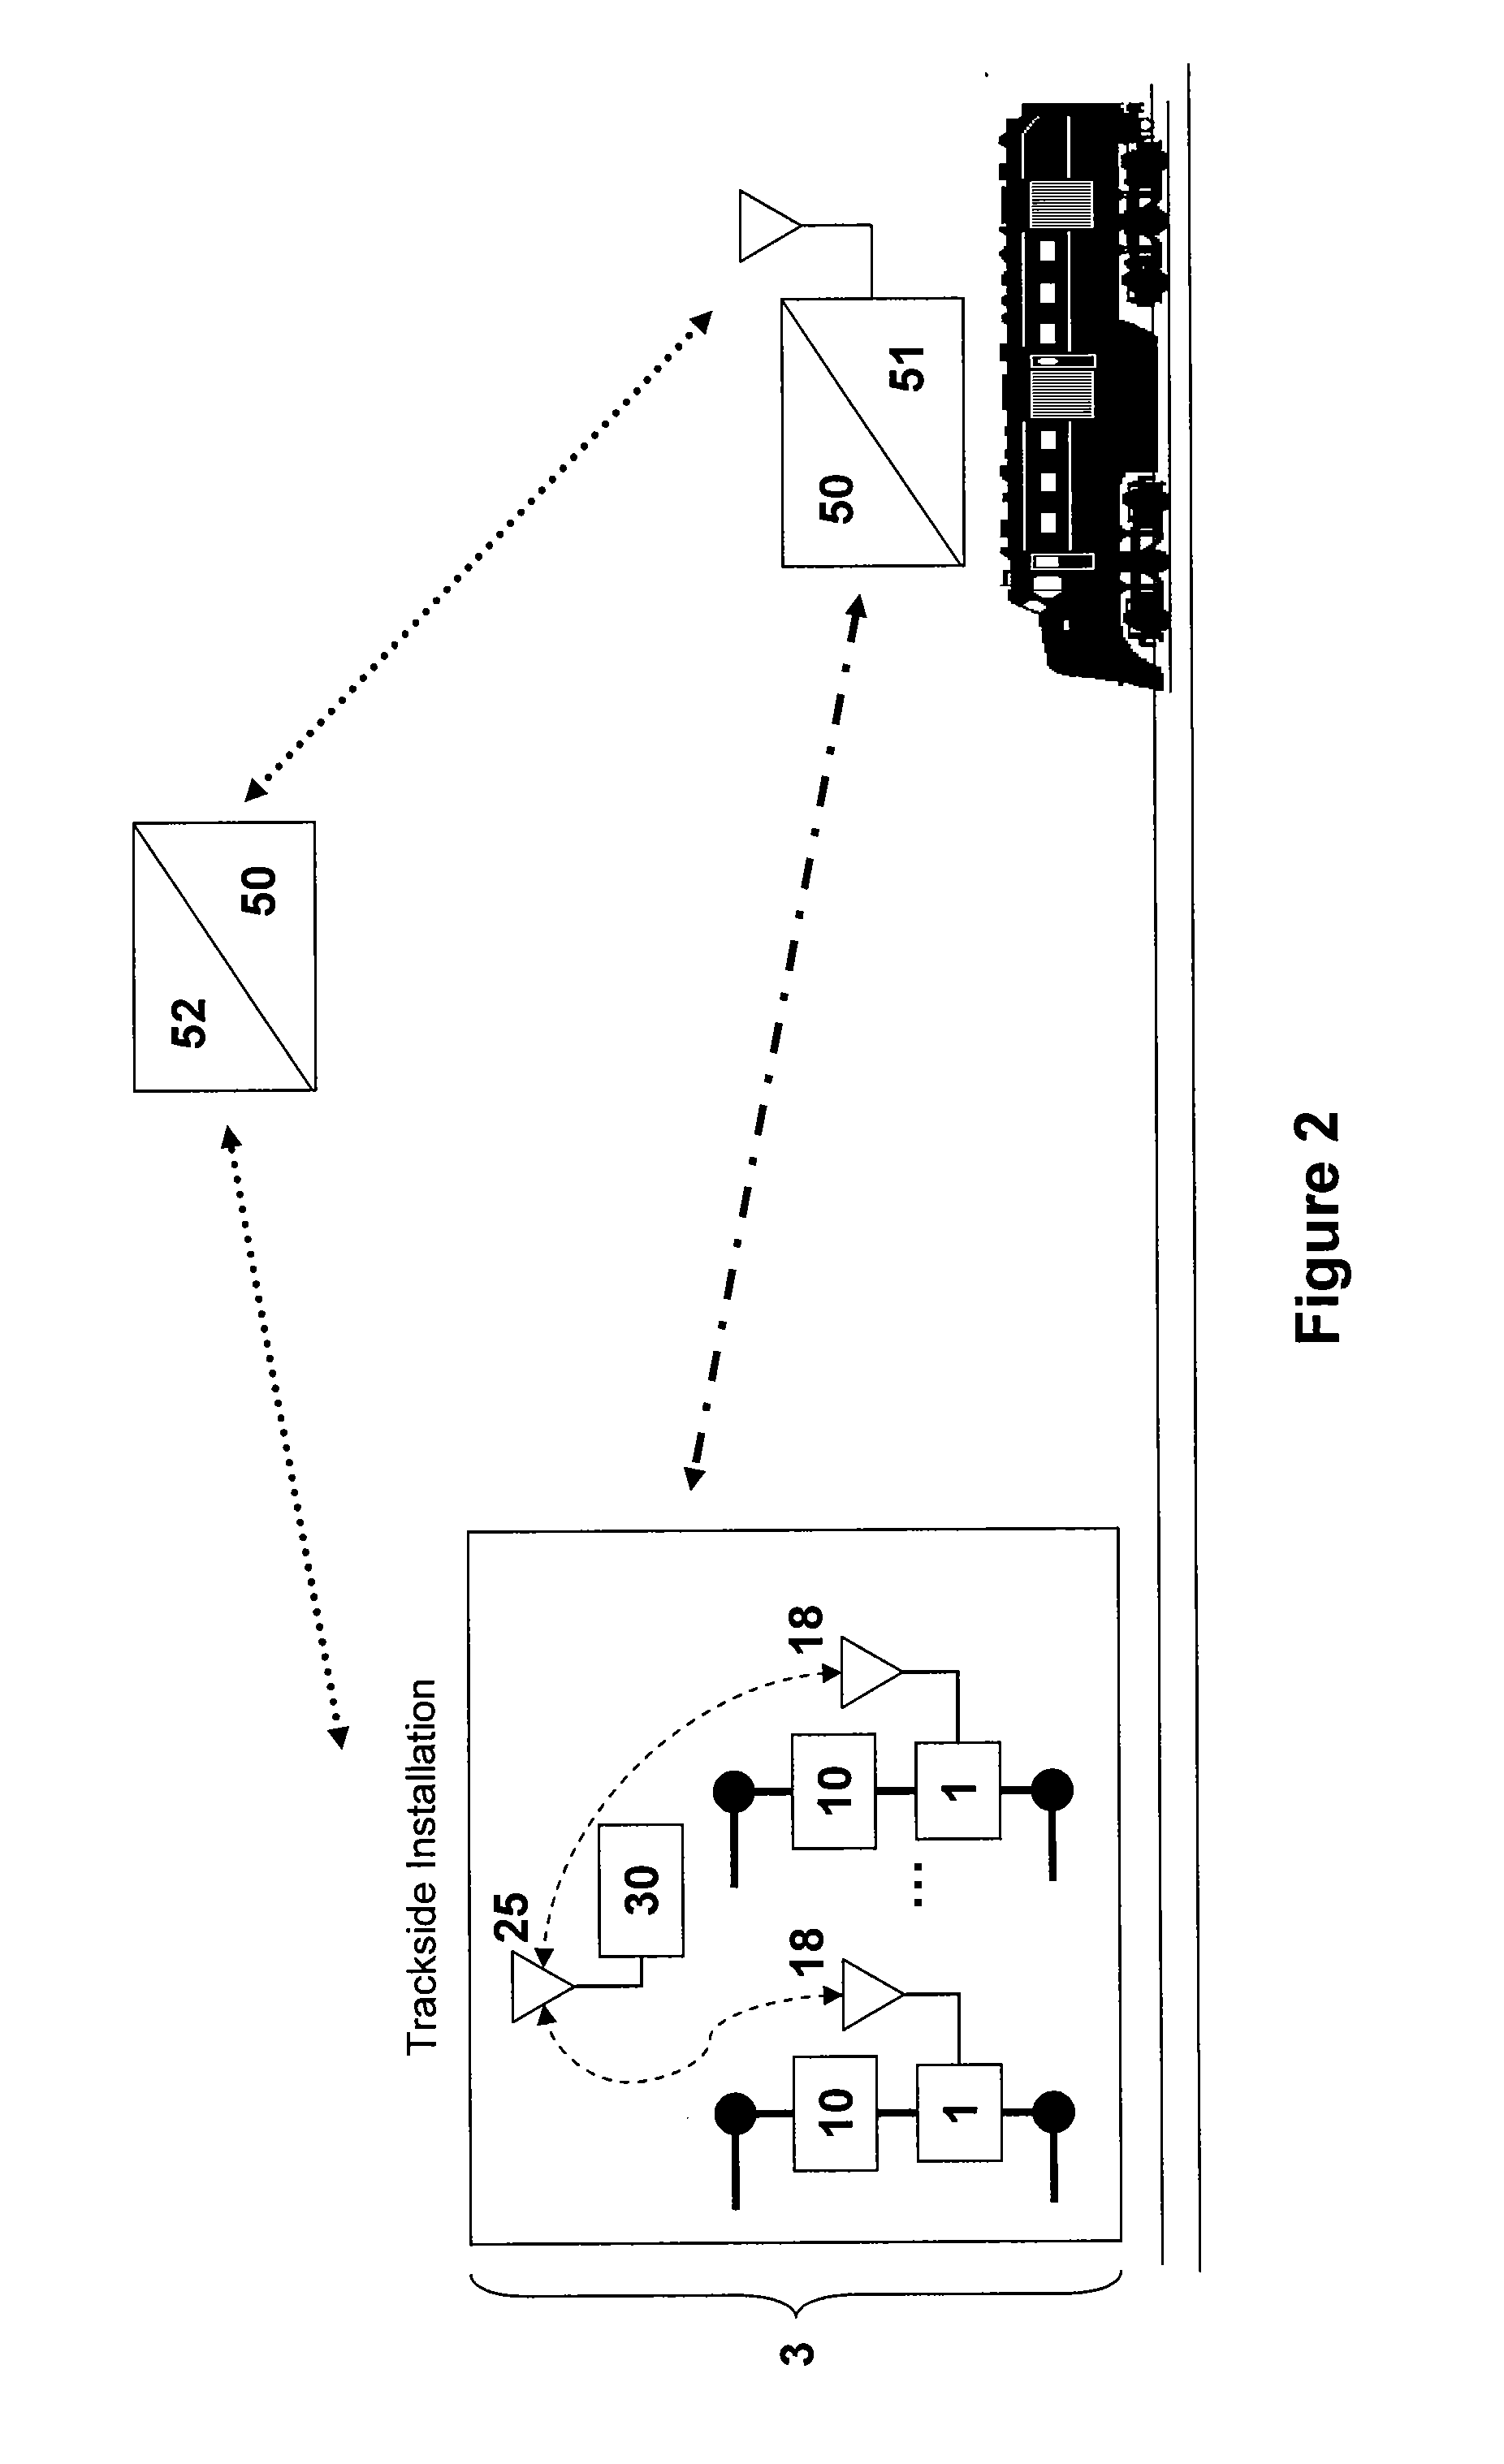 Railroad signaling and communication system using a fail-safe voltage sensor to verify trackside conditions in safety-critical railroad applications